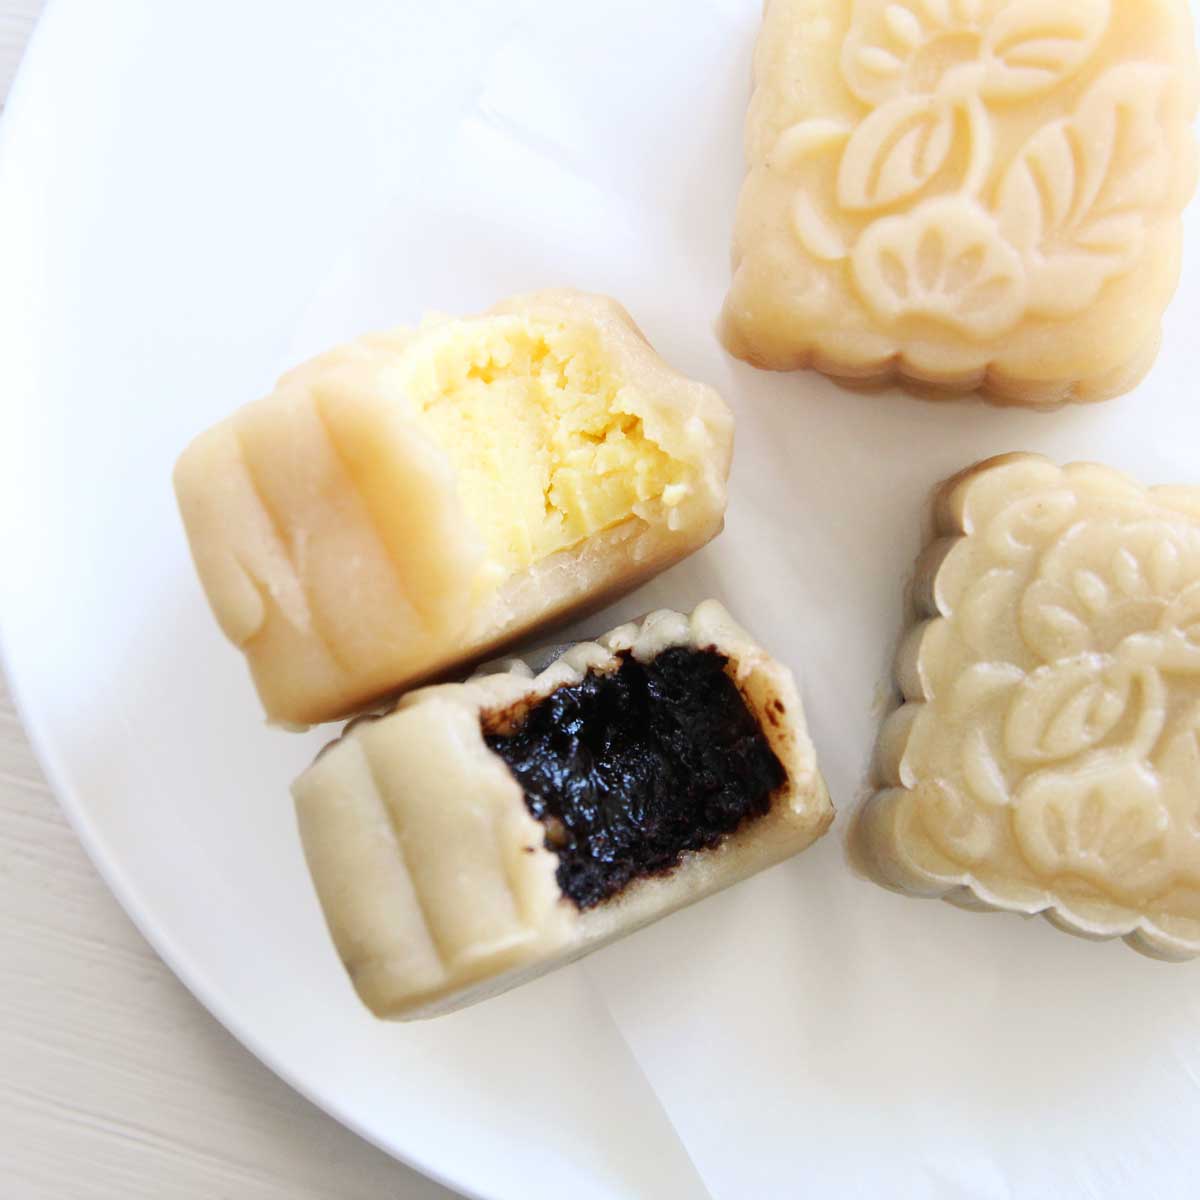 Peanut Butter Snow Skin Mooncakes with Brownie FIlling - Peanut Butter Snow Skin Mooncakes